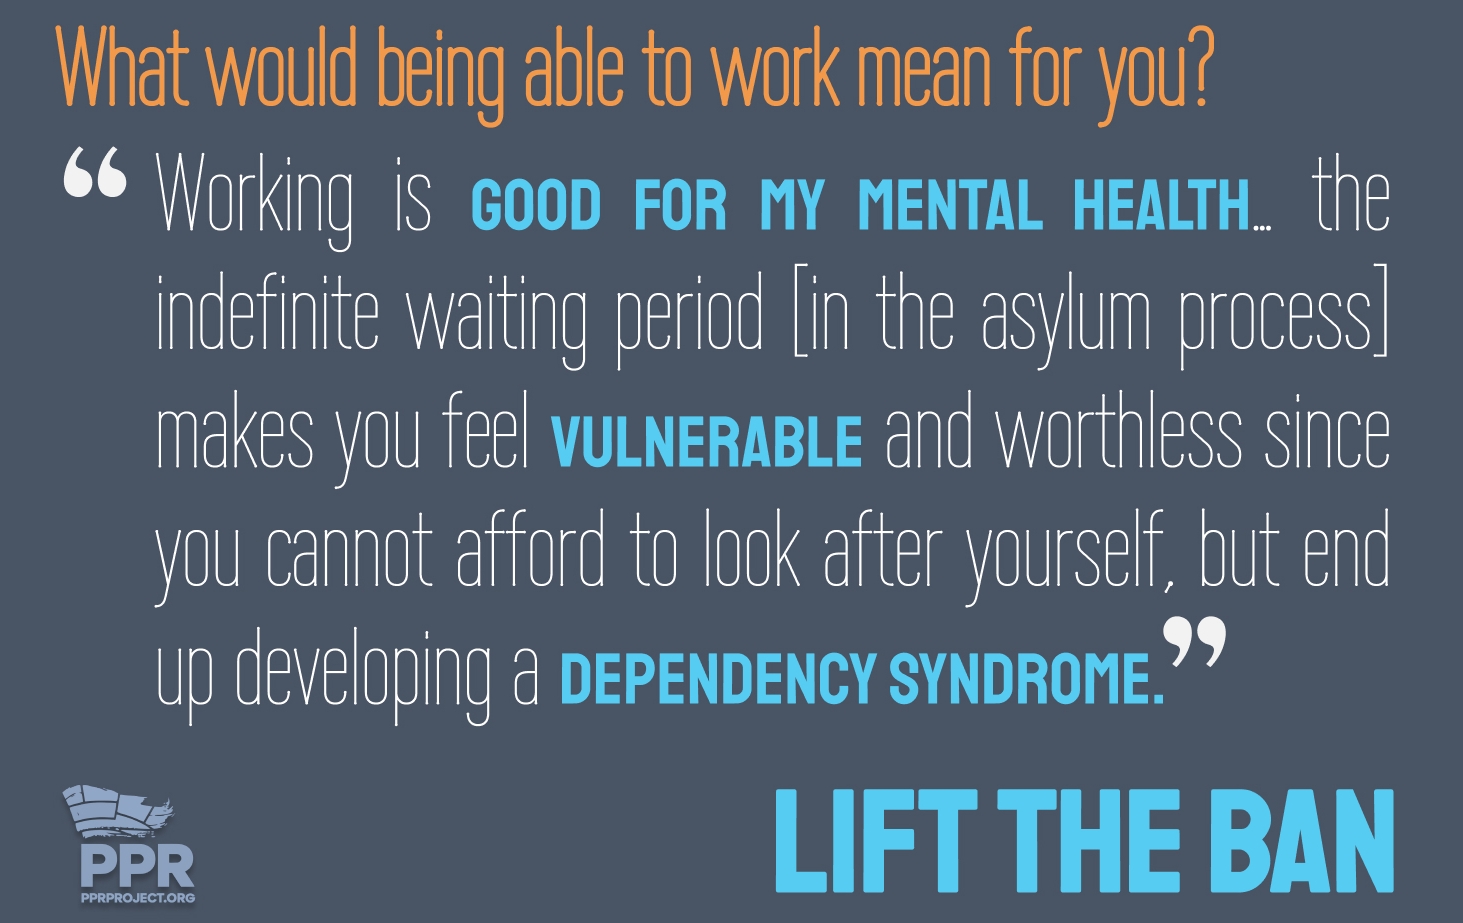 What would being able to work mean for you? Working is good for my mental health. The indefinite waiting period [in the asylum process] makes you feel vulnerable and worthless since you cannot afford to look after yourself, but end up developing a dependency syndrome."